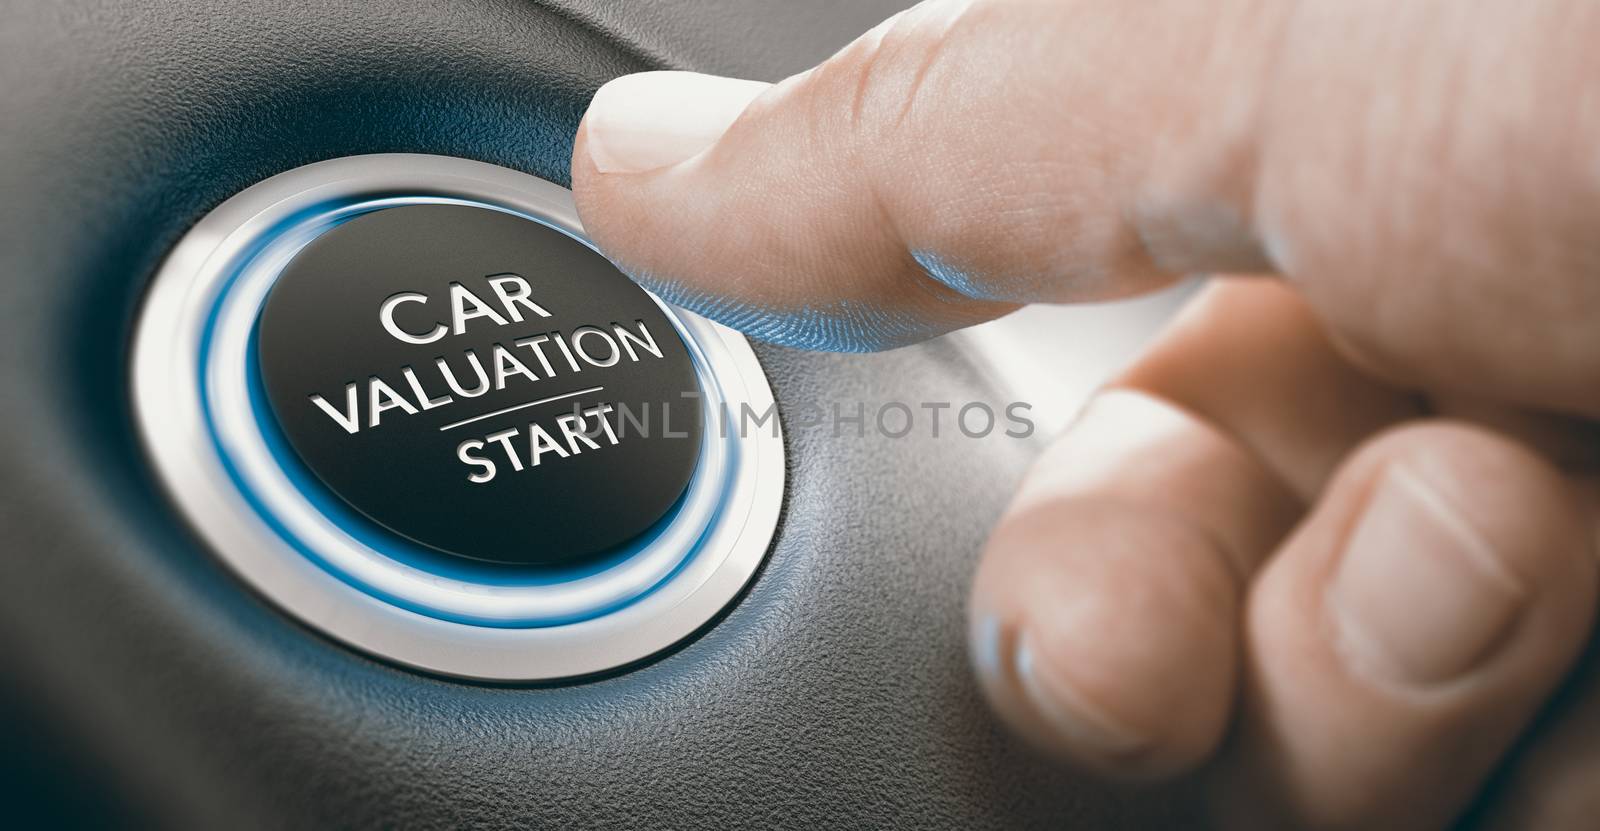 Finger pressing a keyless ingnition button where it is written the text car valuation start. Composite image between a hand photography and a 3D background.